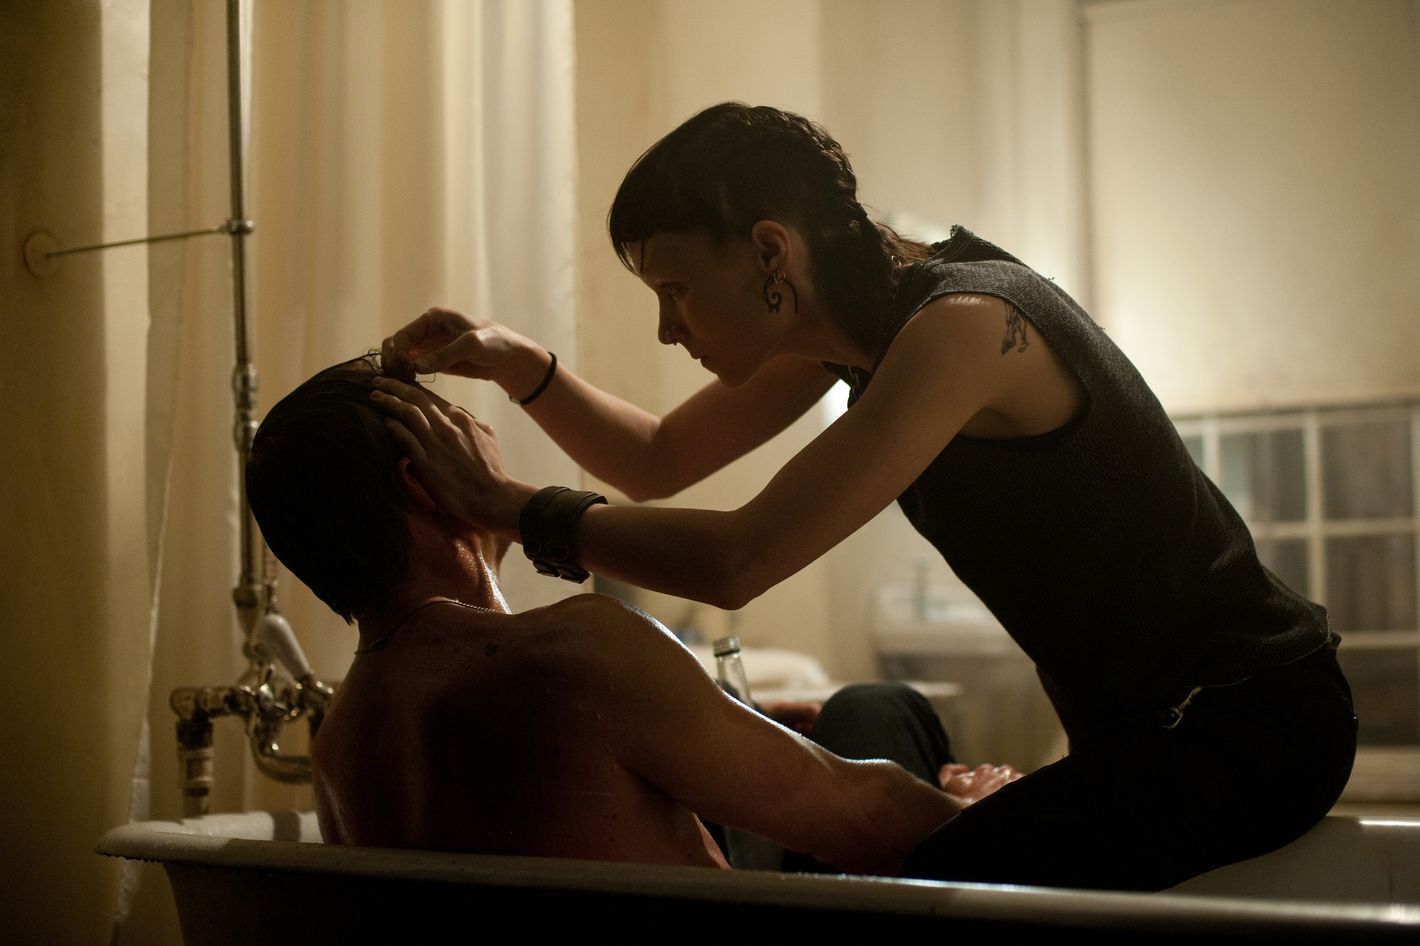 A poster from the Hollywood movie The Girl With The Dragon Tattoo